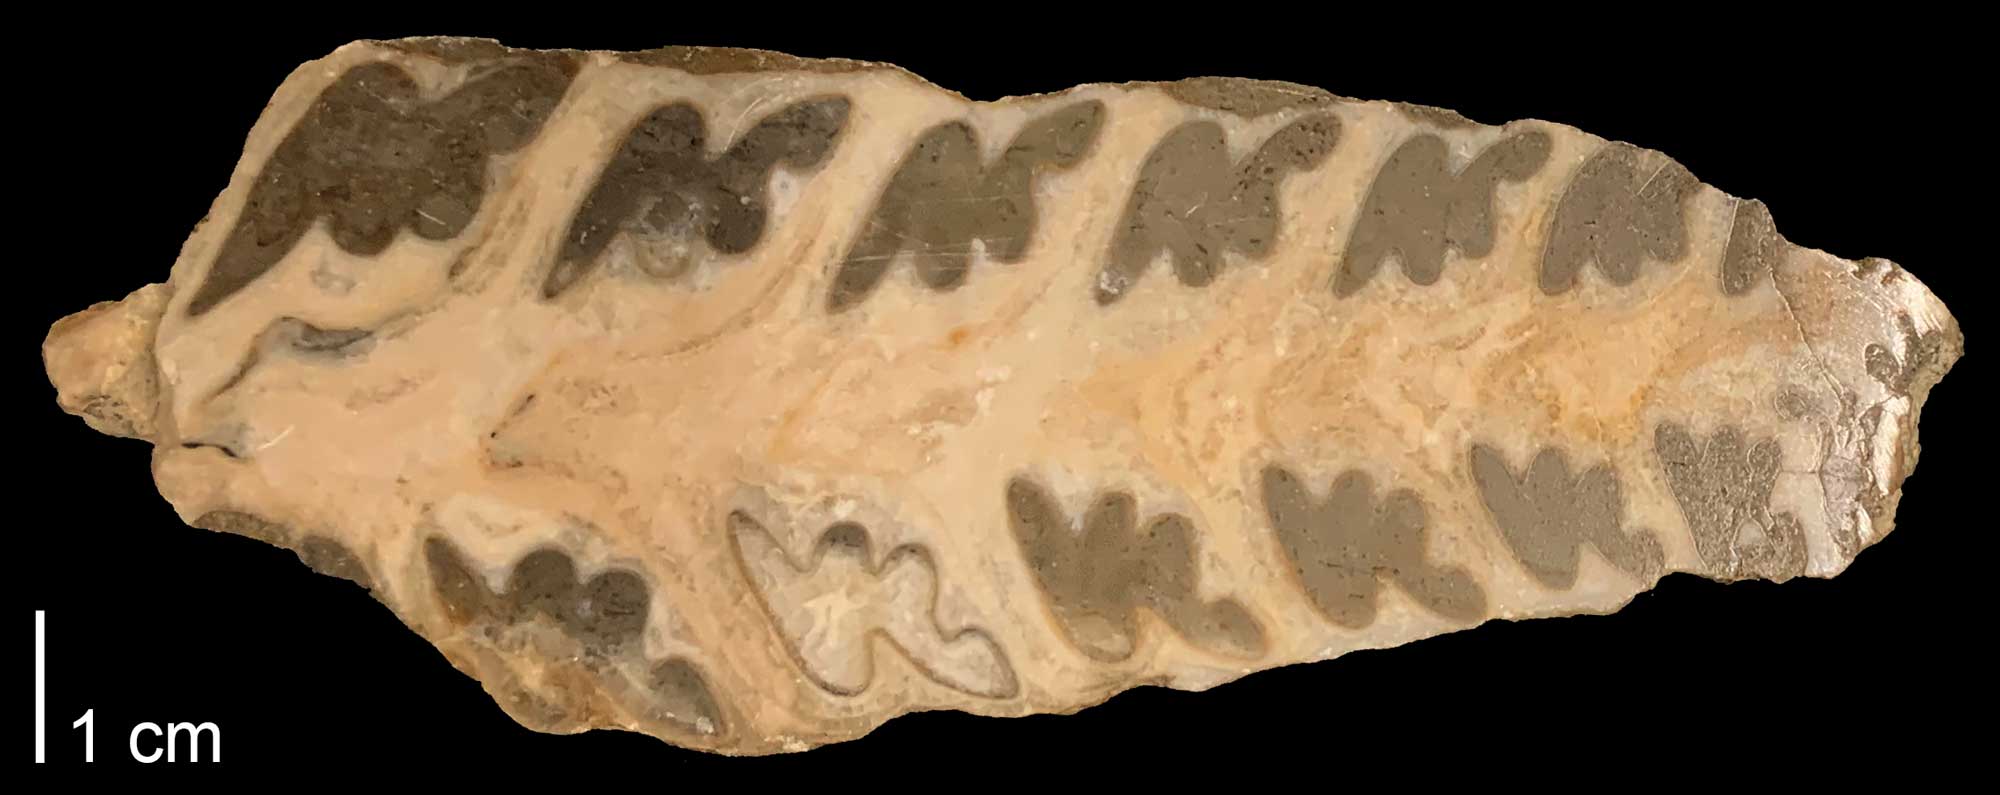 Photograph of a sectioned specimen of the nerineoid Simploptyrix pailletteana showing the internal shell features, including plaits.